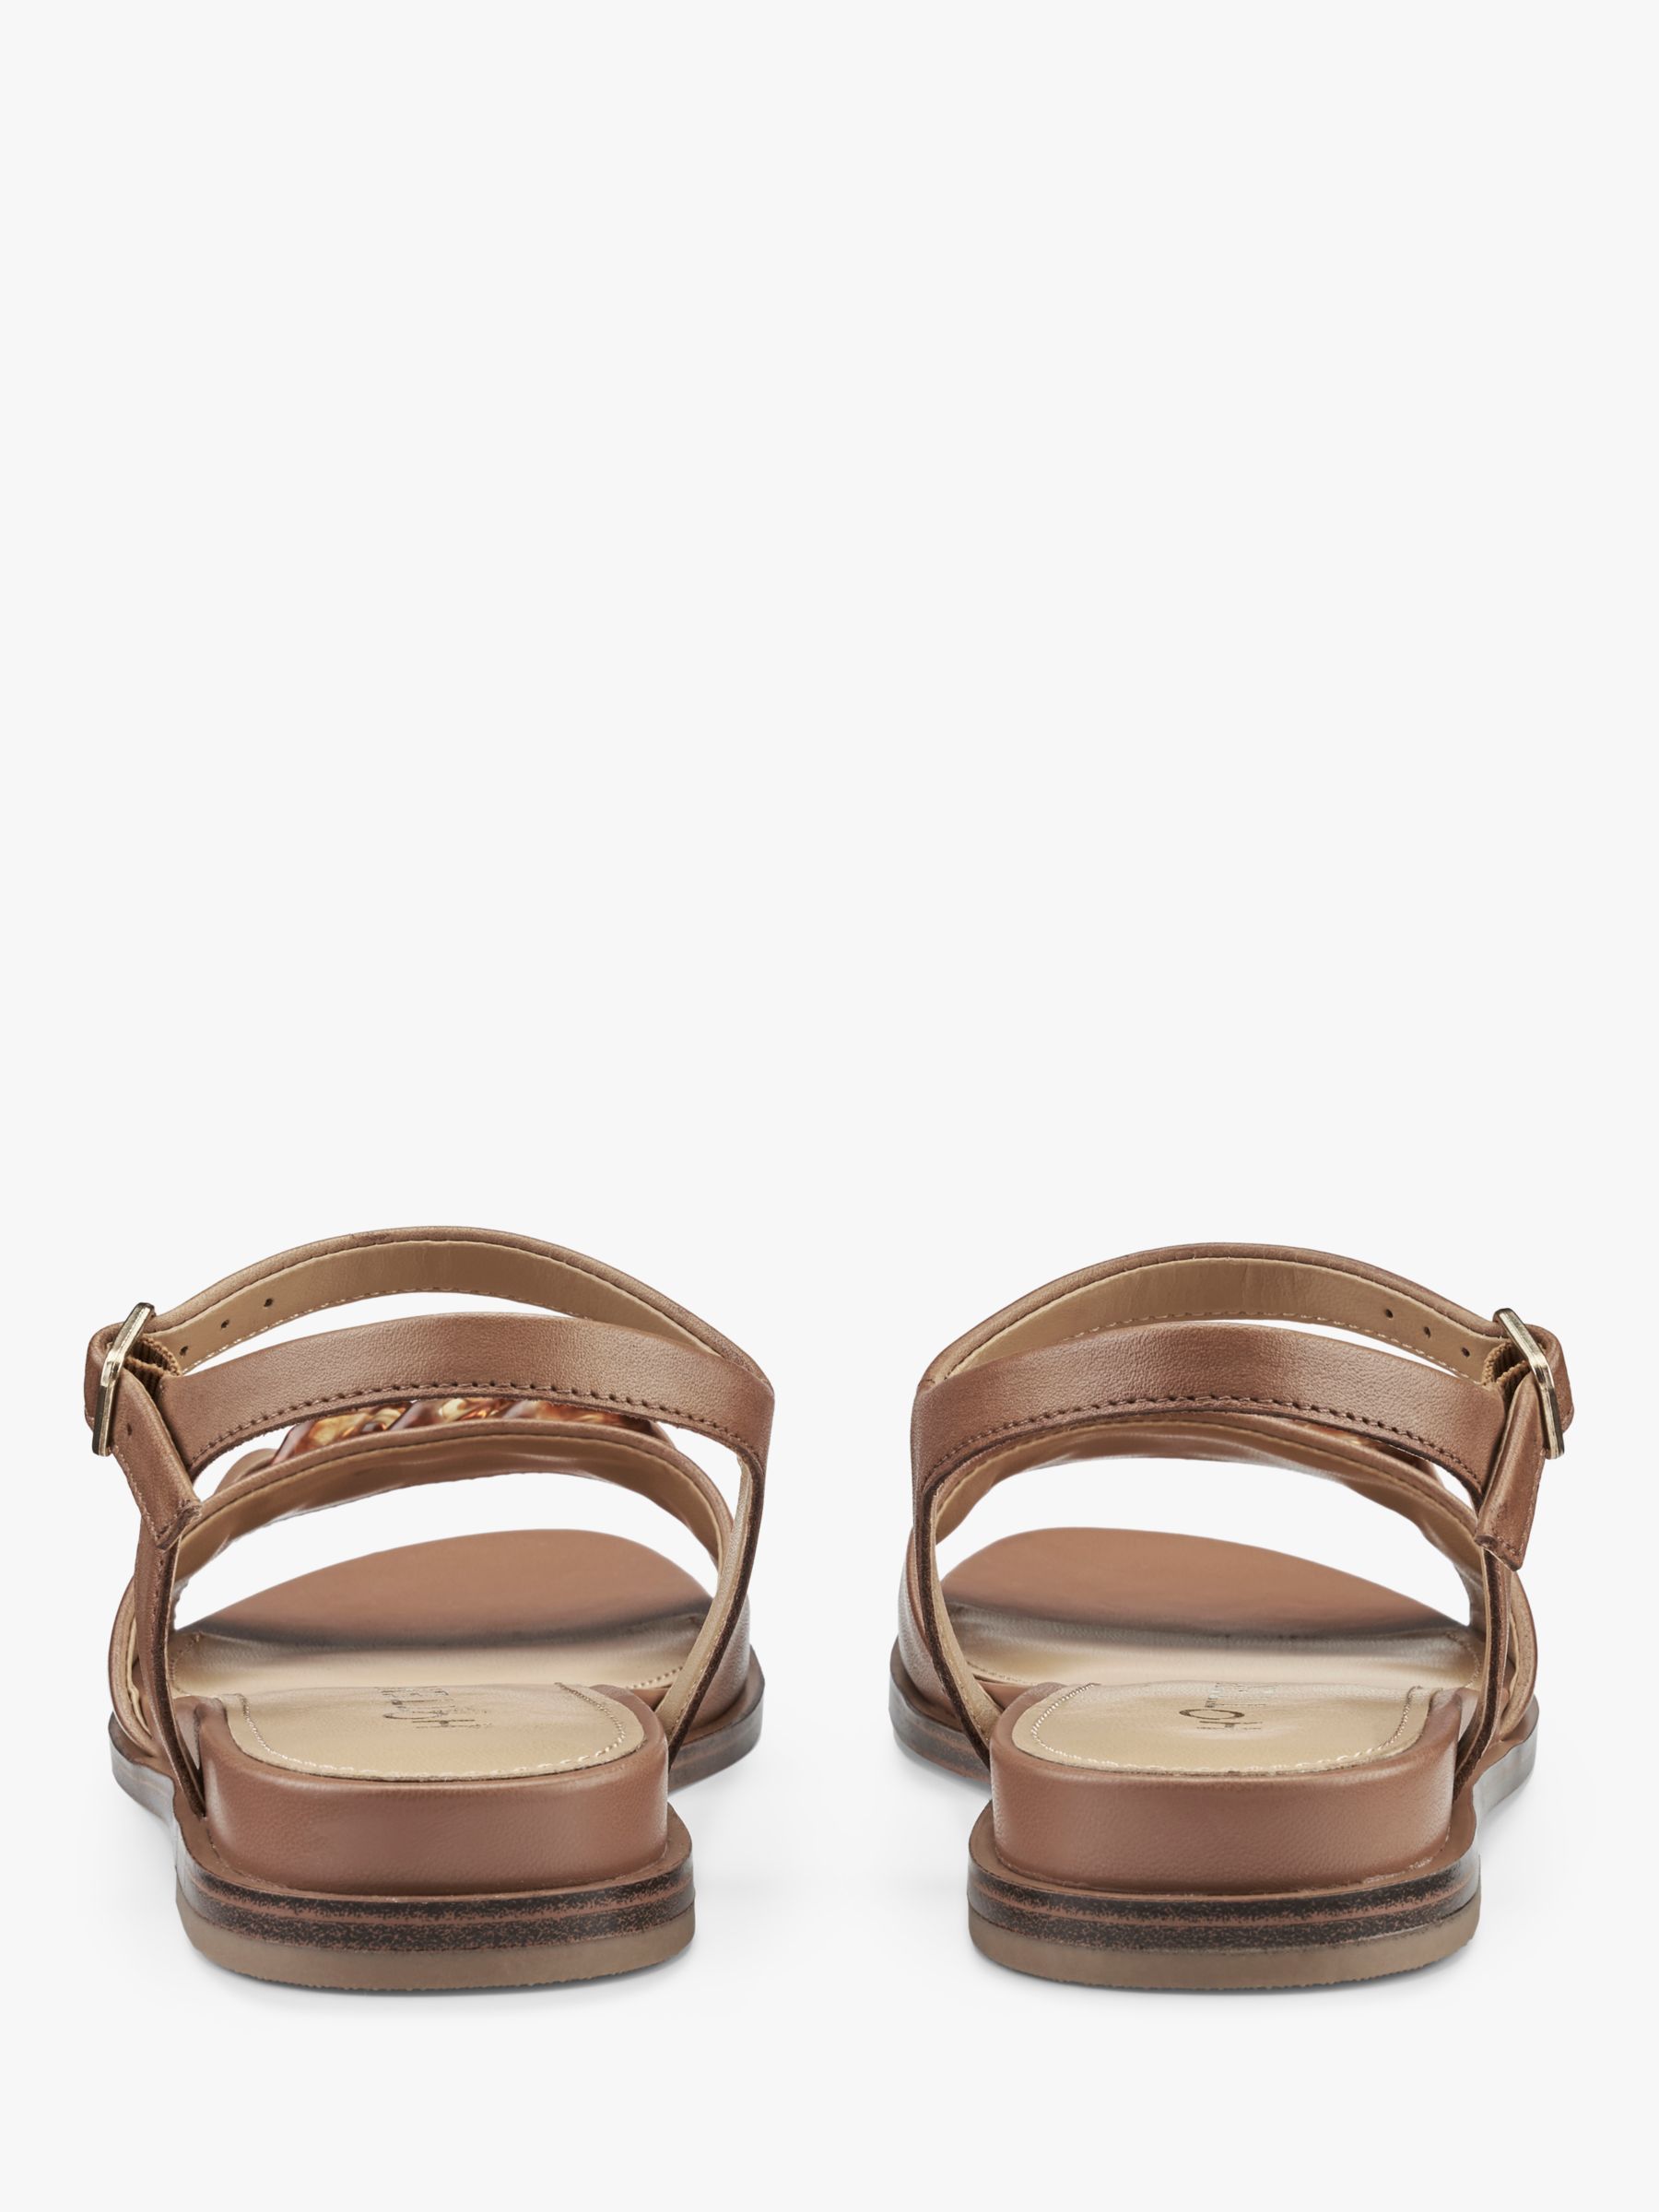 Buy Hotter Modena Wide Fit Leather Ankle Strap Sandals, Rich Tan Online at johnlewis.com